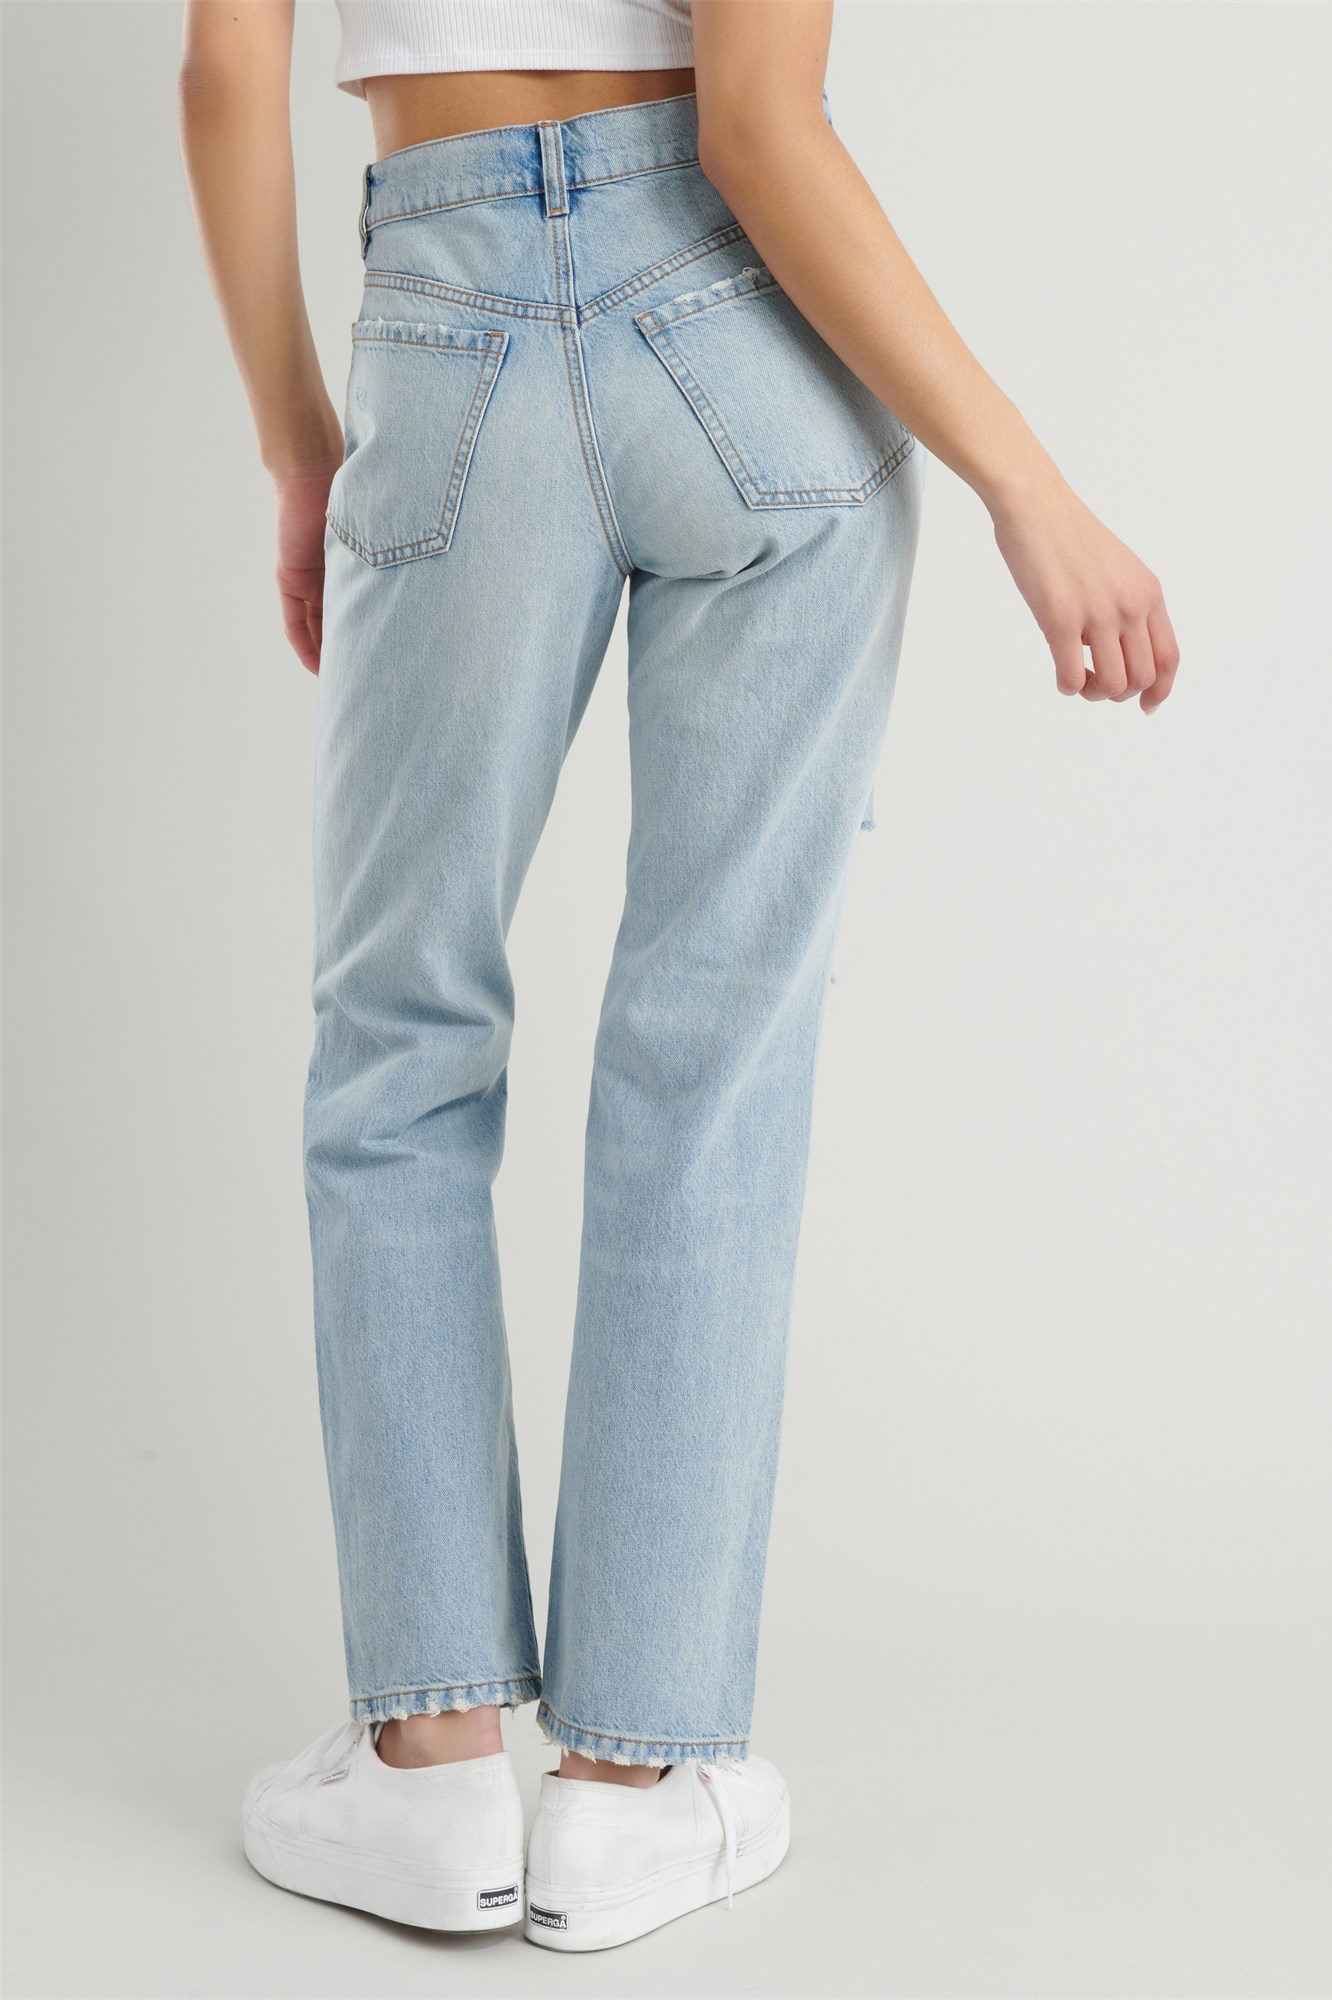 What are 90s style jeans called?